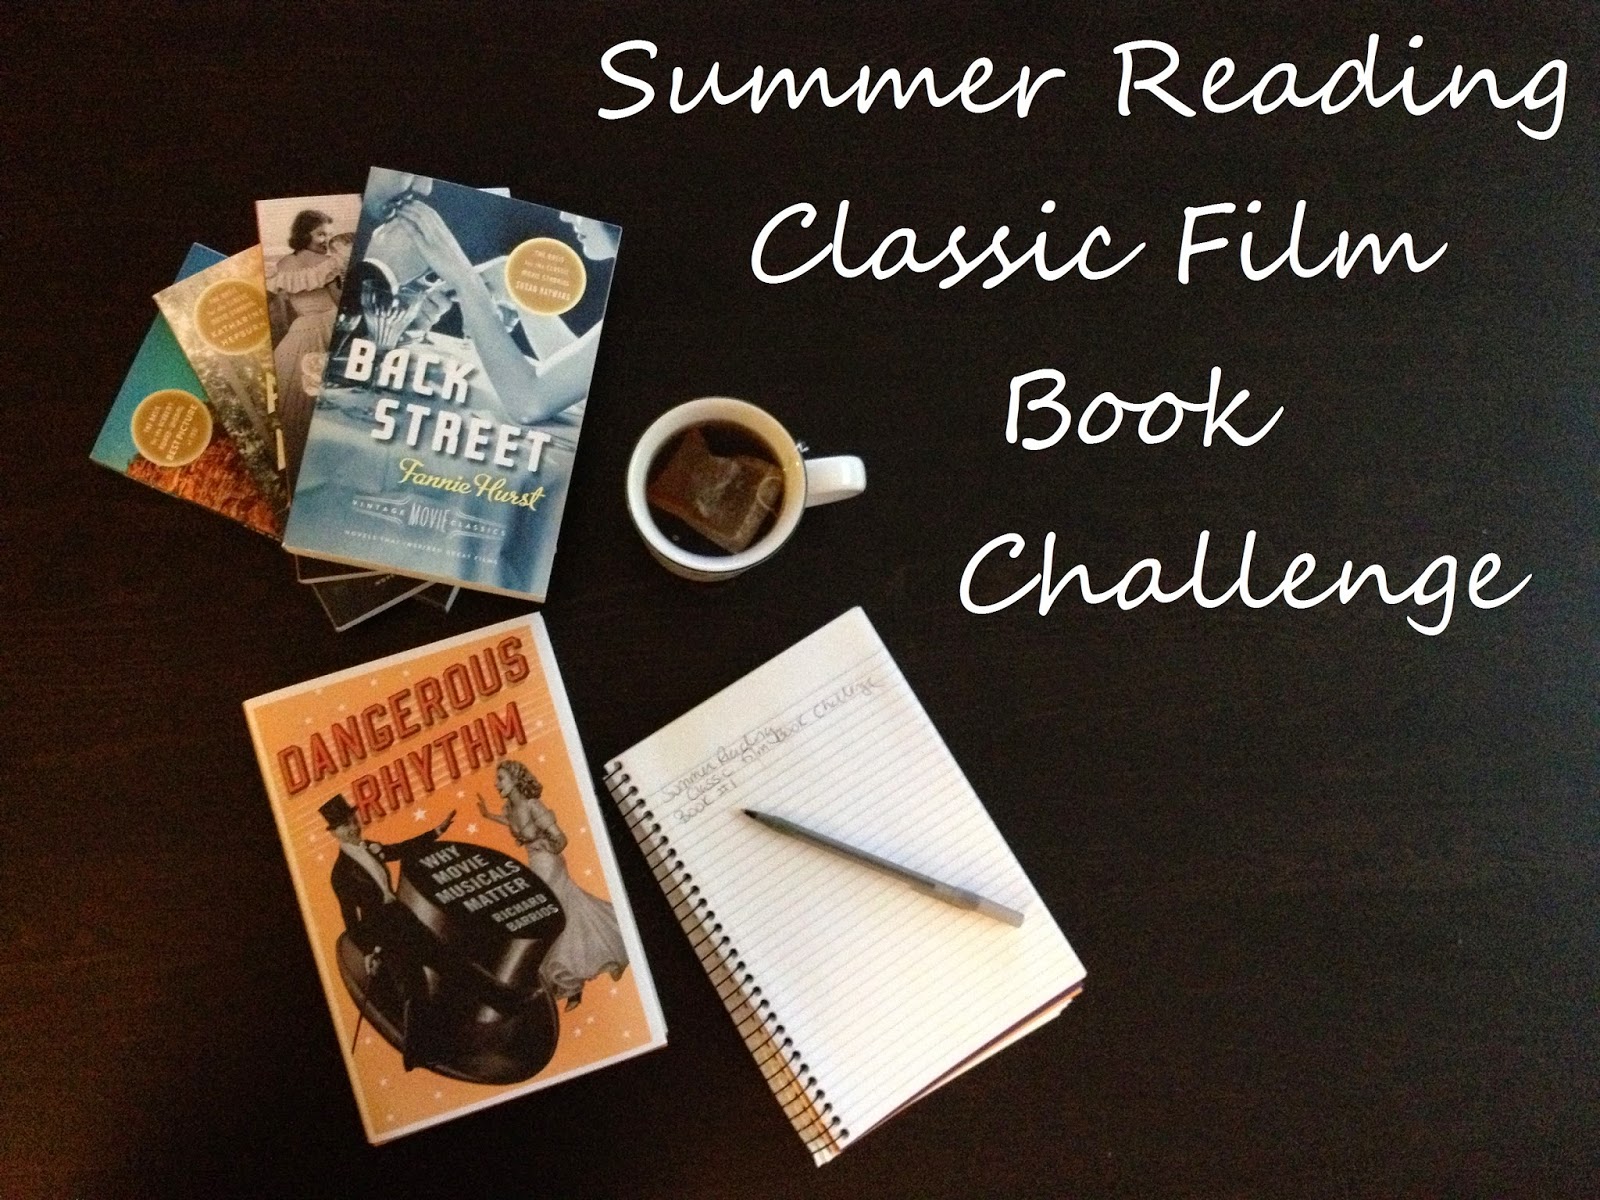 Grab button for the 2014 Summer Reading Classic Film Book Challenge